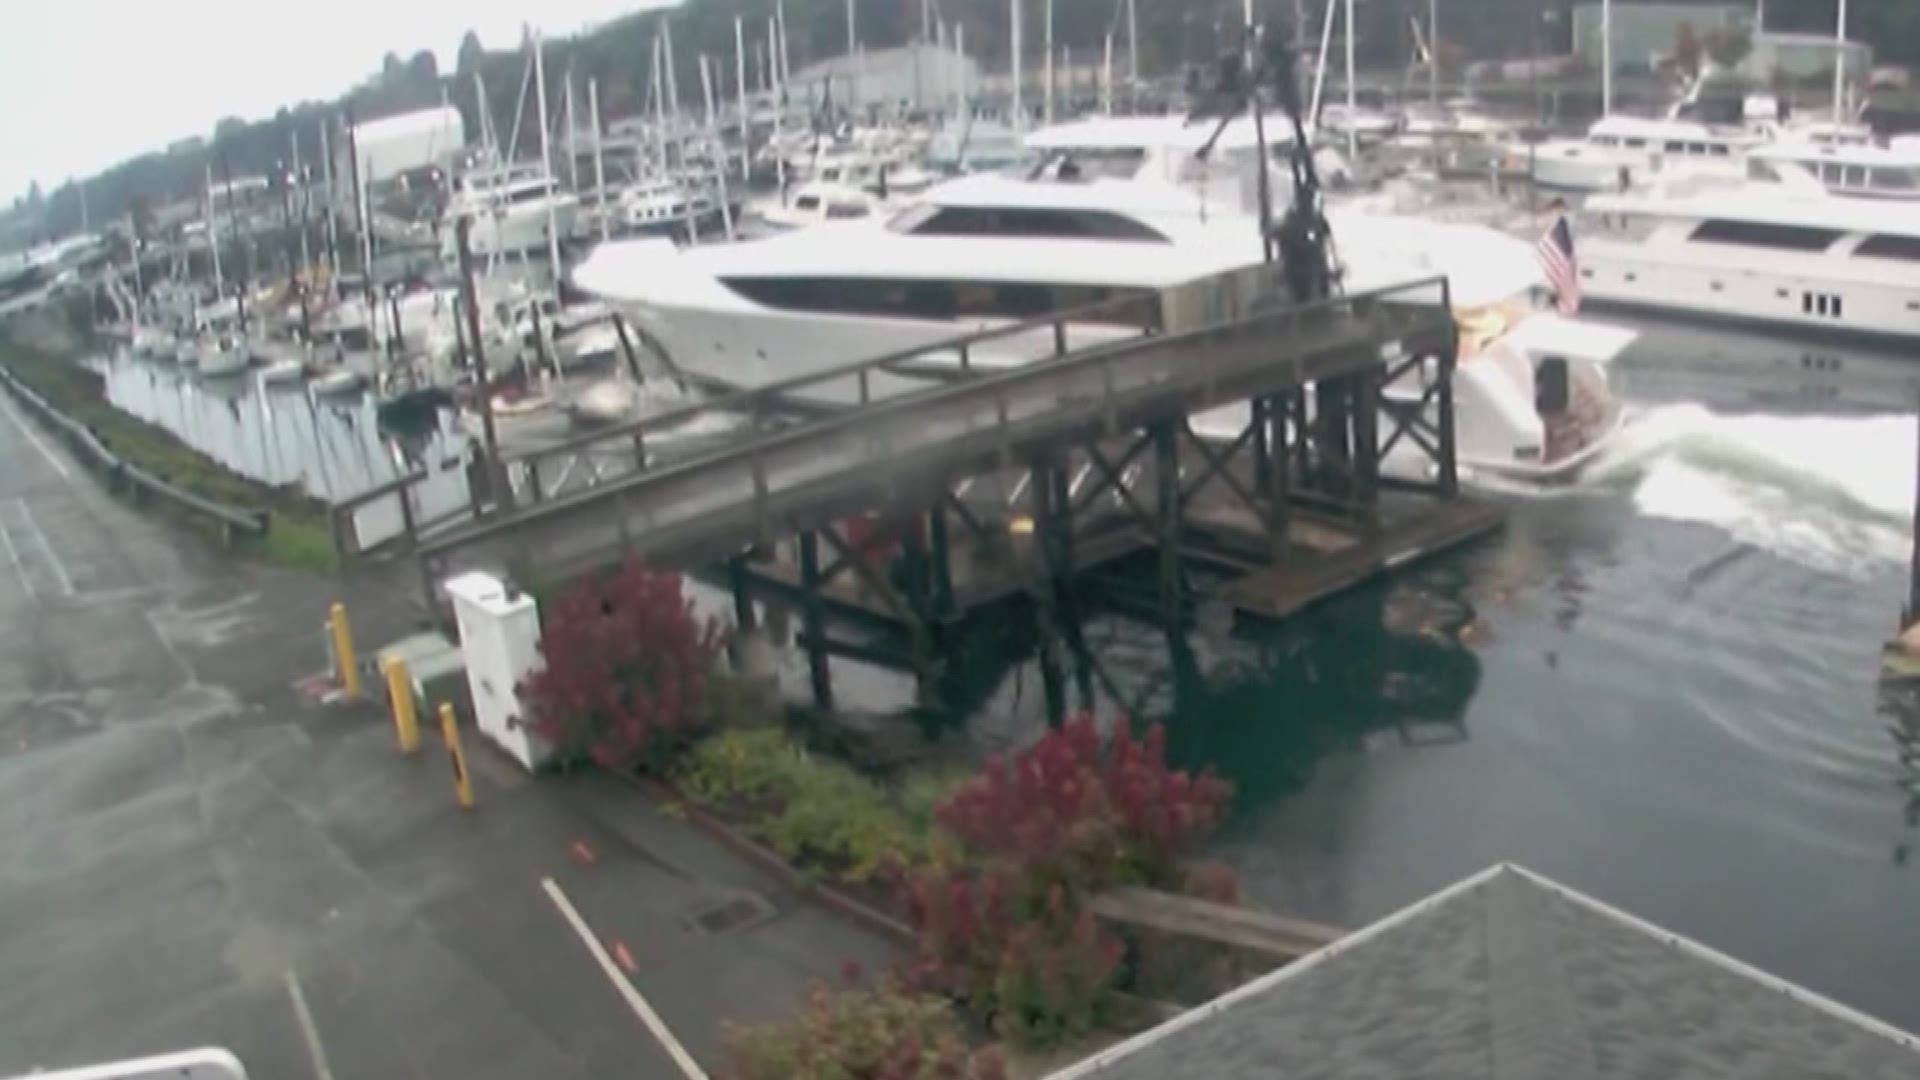 A new 125-foot yacht plowed into a dock and smaller boats at the Port Angeles Boat Haven in Washington on 10/7/19.